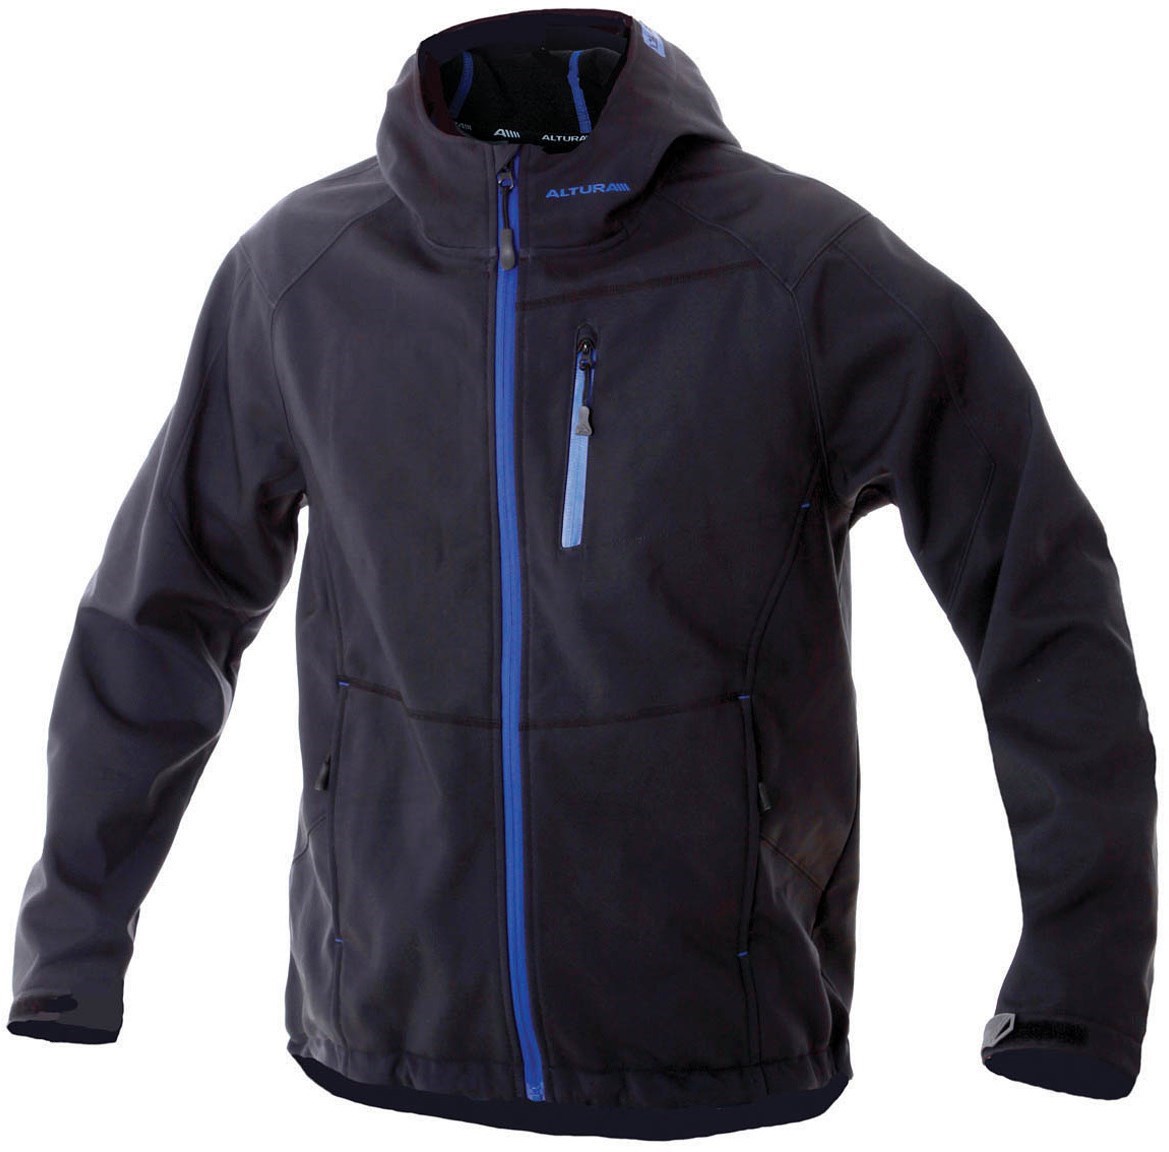 Altura Attack Softshell Windproof Jacket 2011 product image